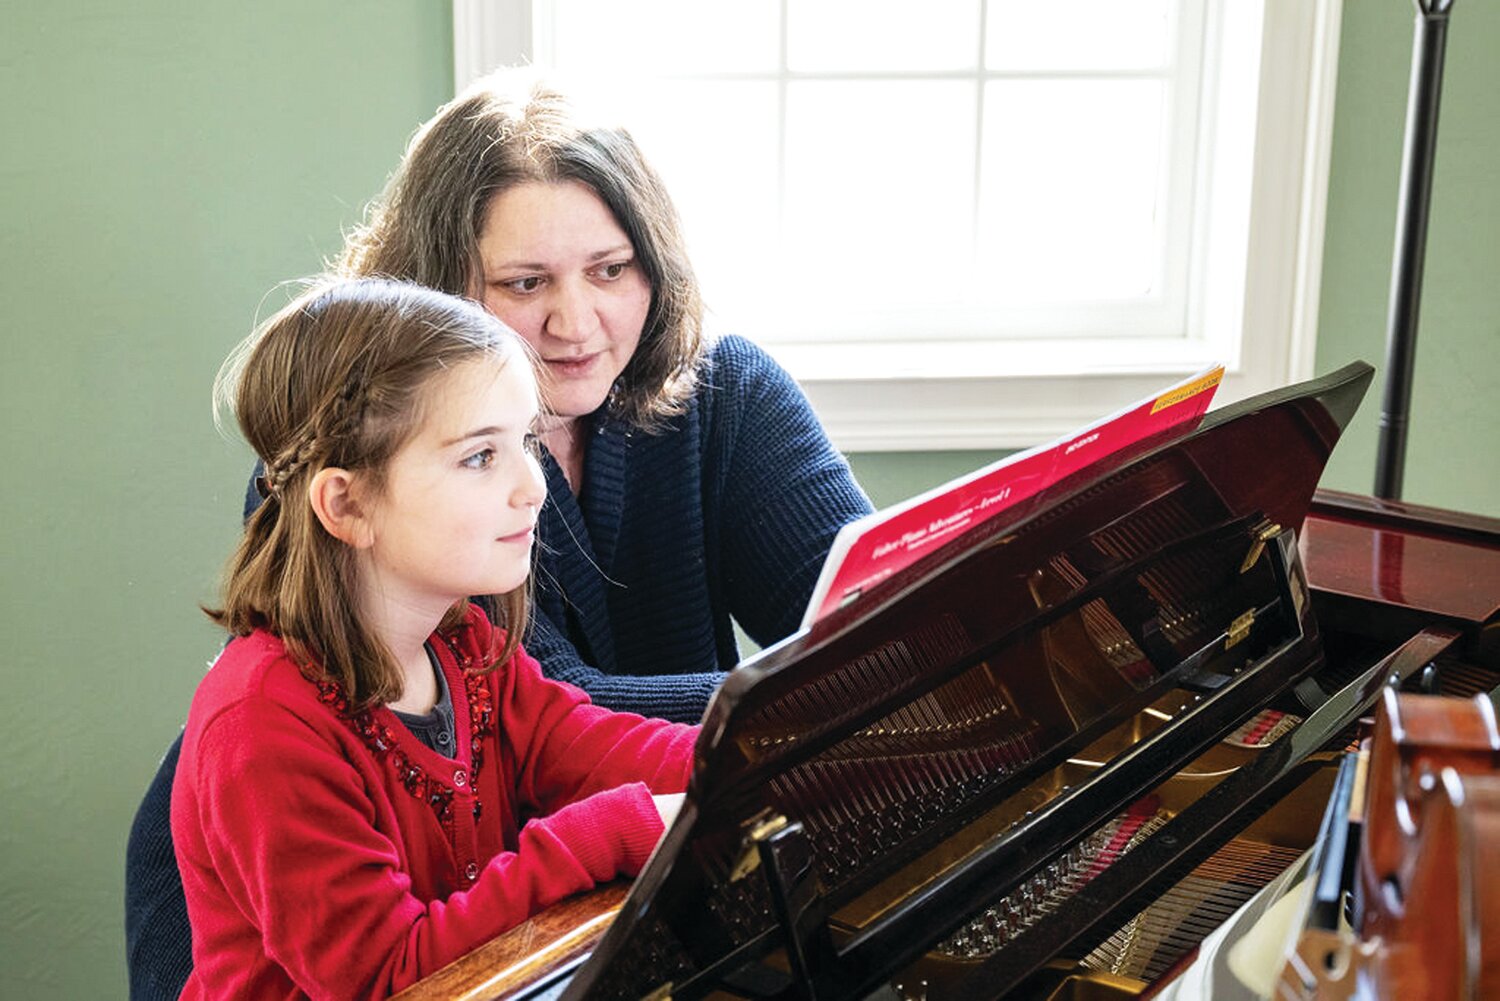 Canal Music Studios founder Adrienne Walsh works with a student.